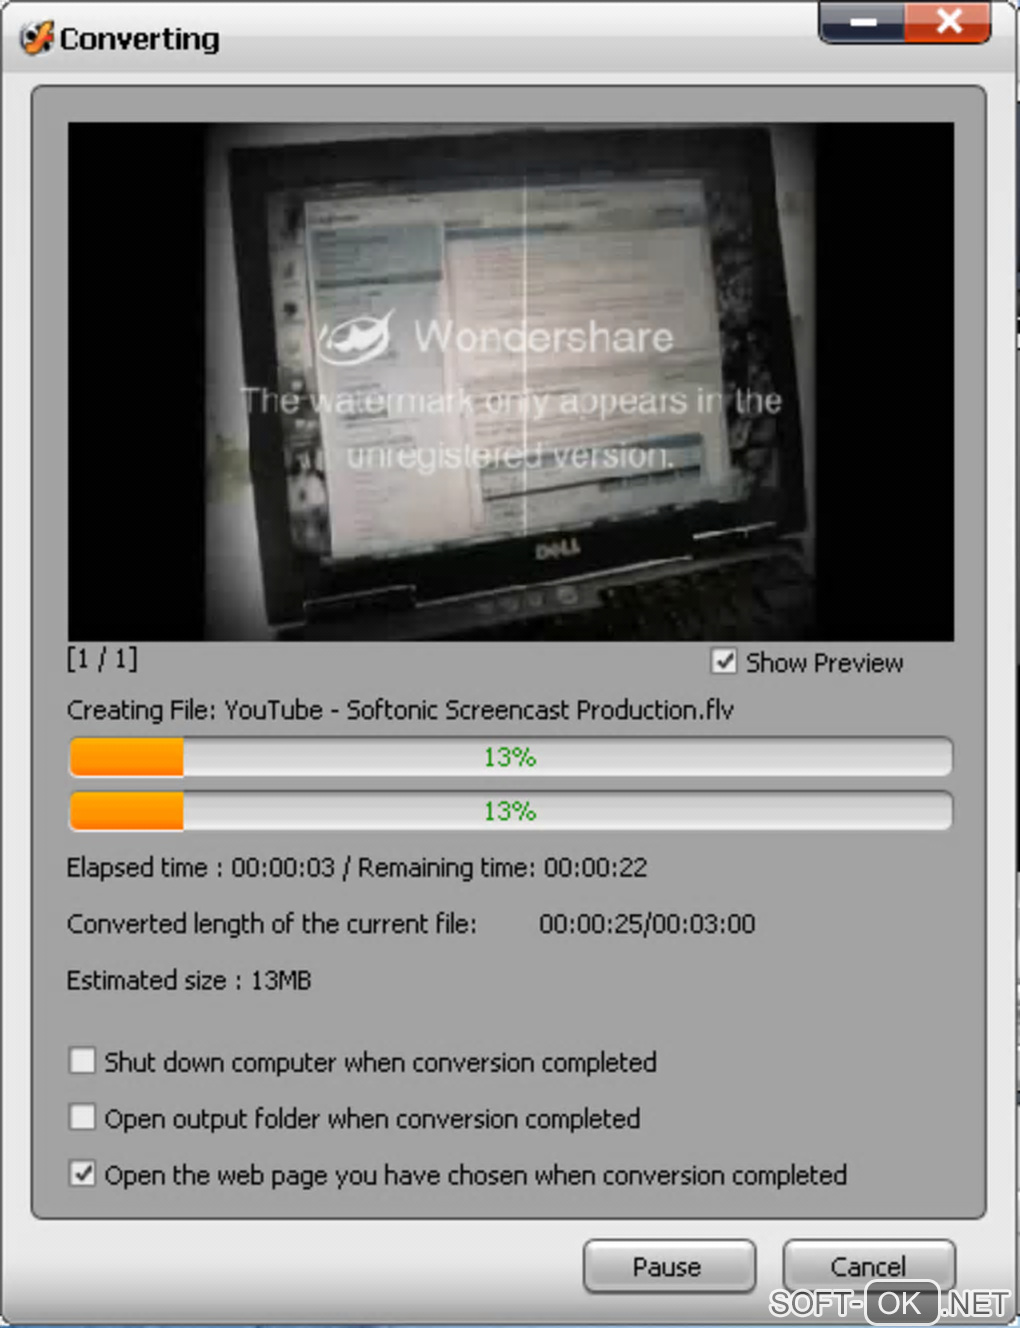 The appearance "Wondershare Video to Flash Encoder"